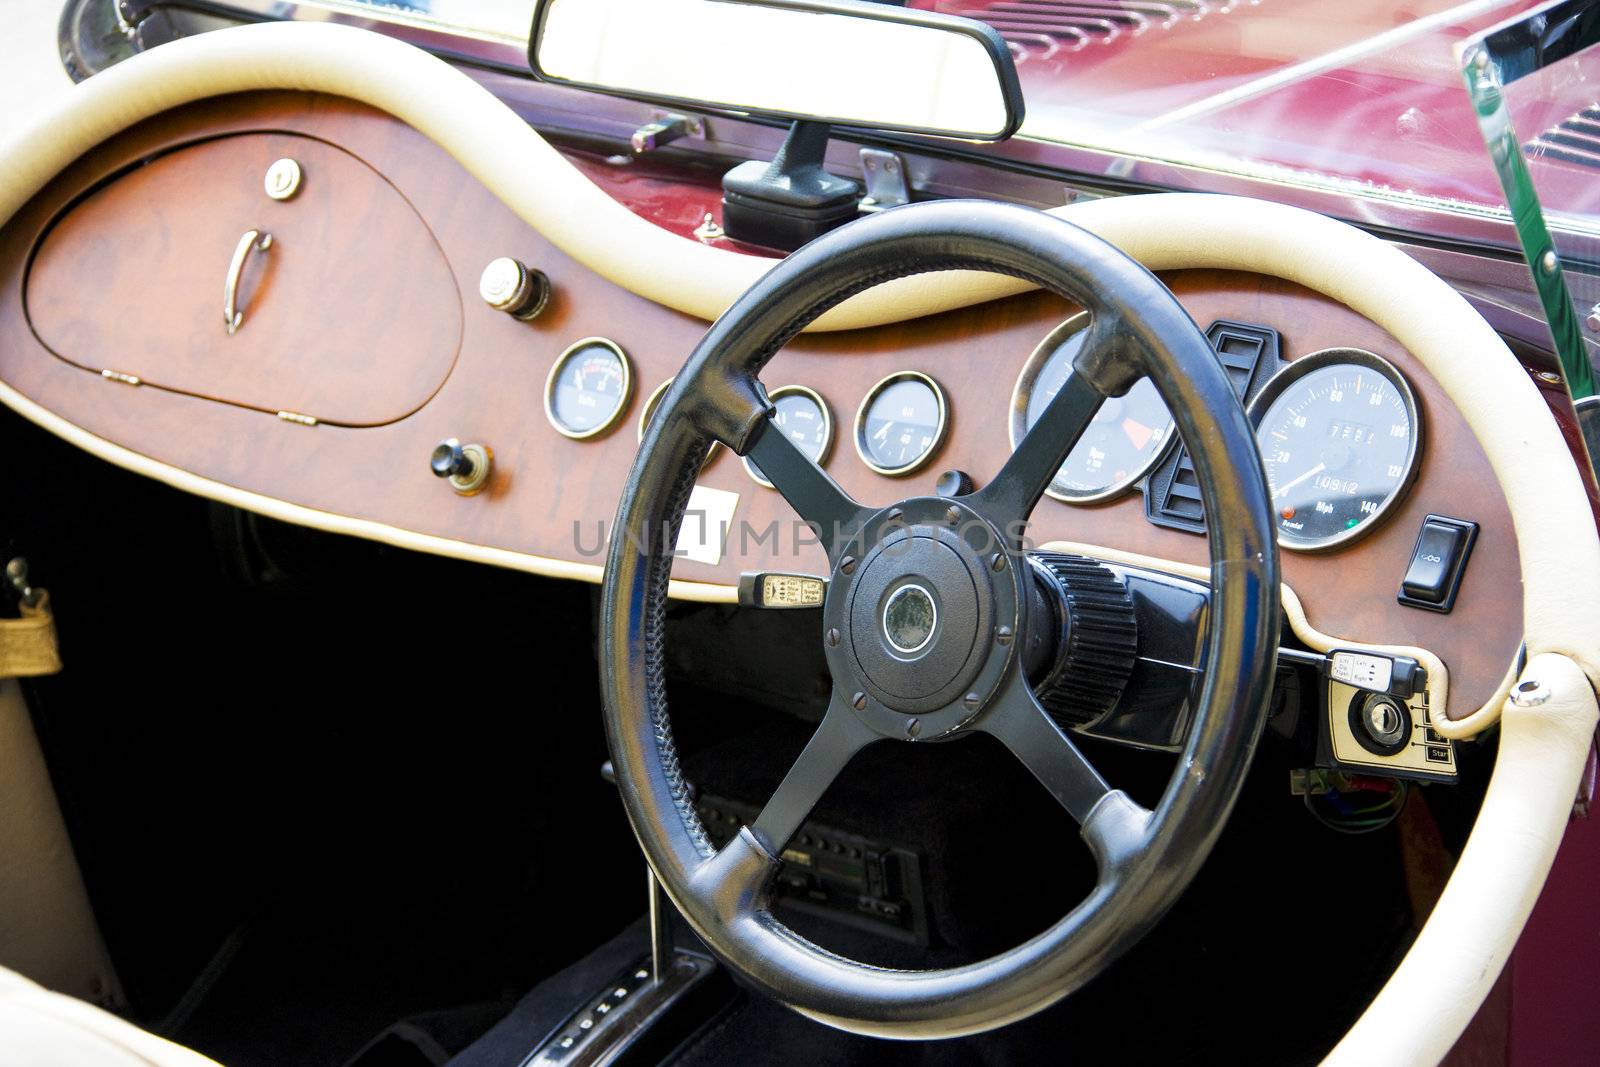 Image of the interior of a vintage car.